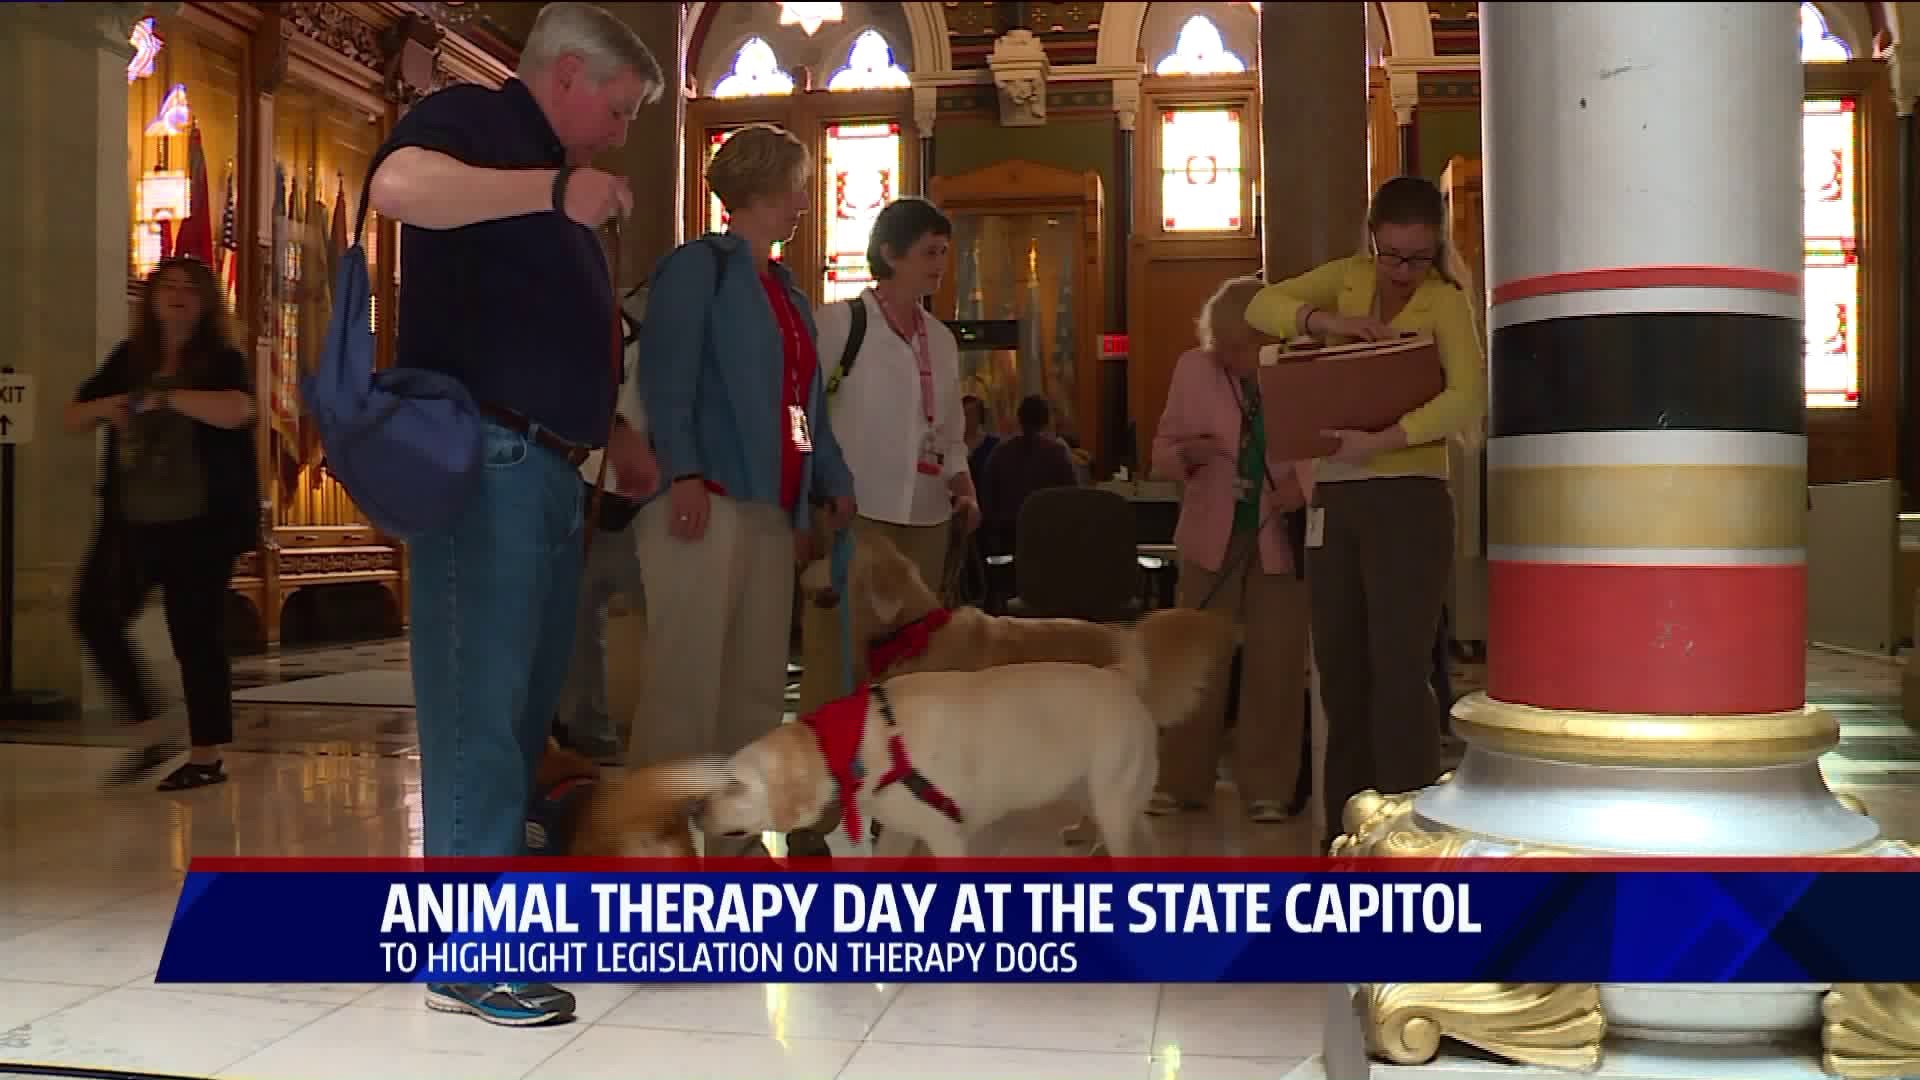 Animal Therapy Day highlights legislation for therapy animals